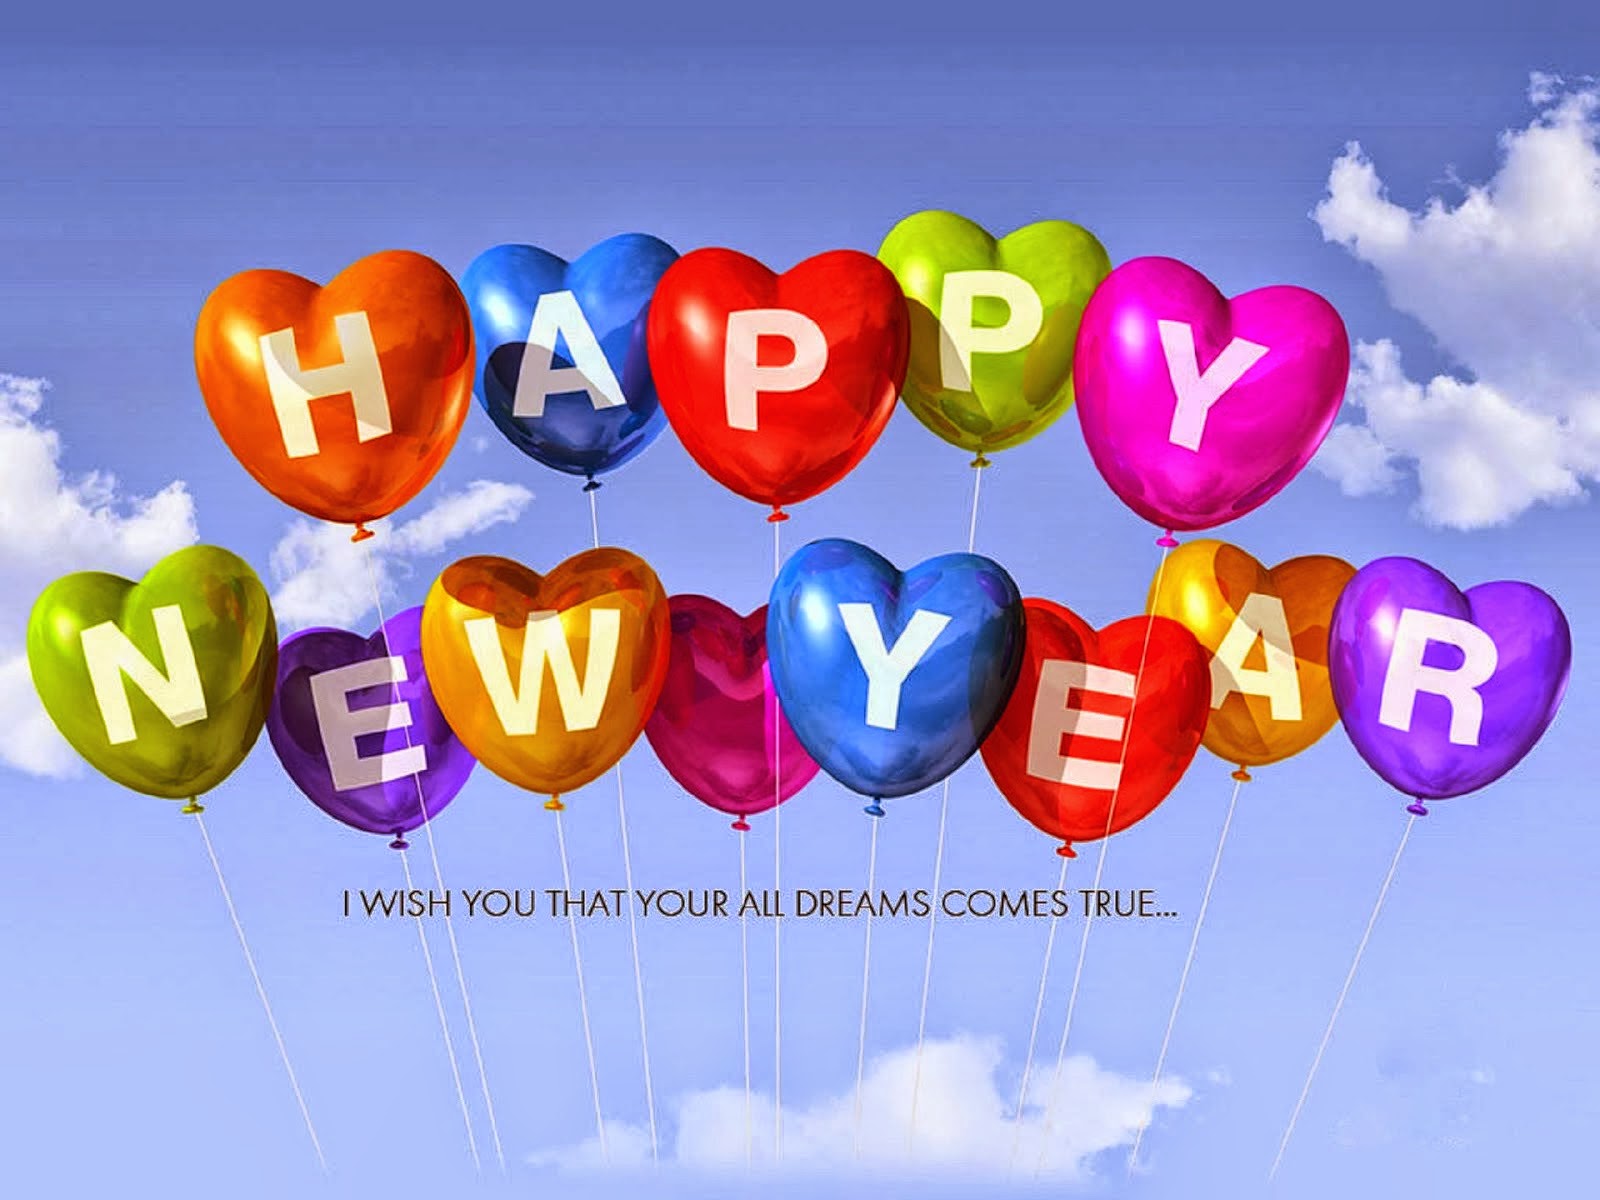 happy new year 2014 clipart for facebook - photo #35